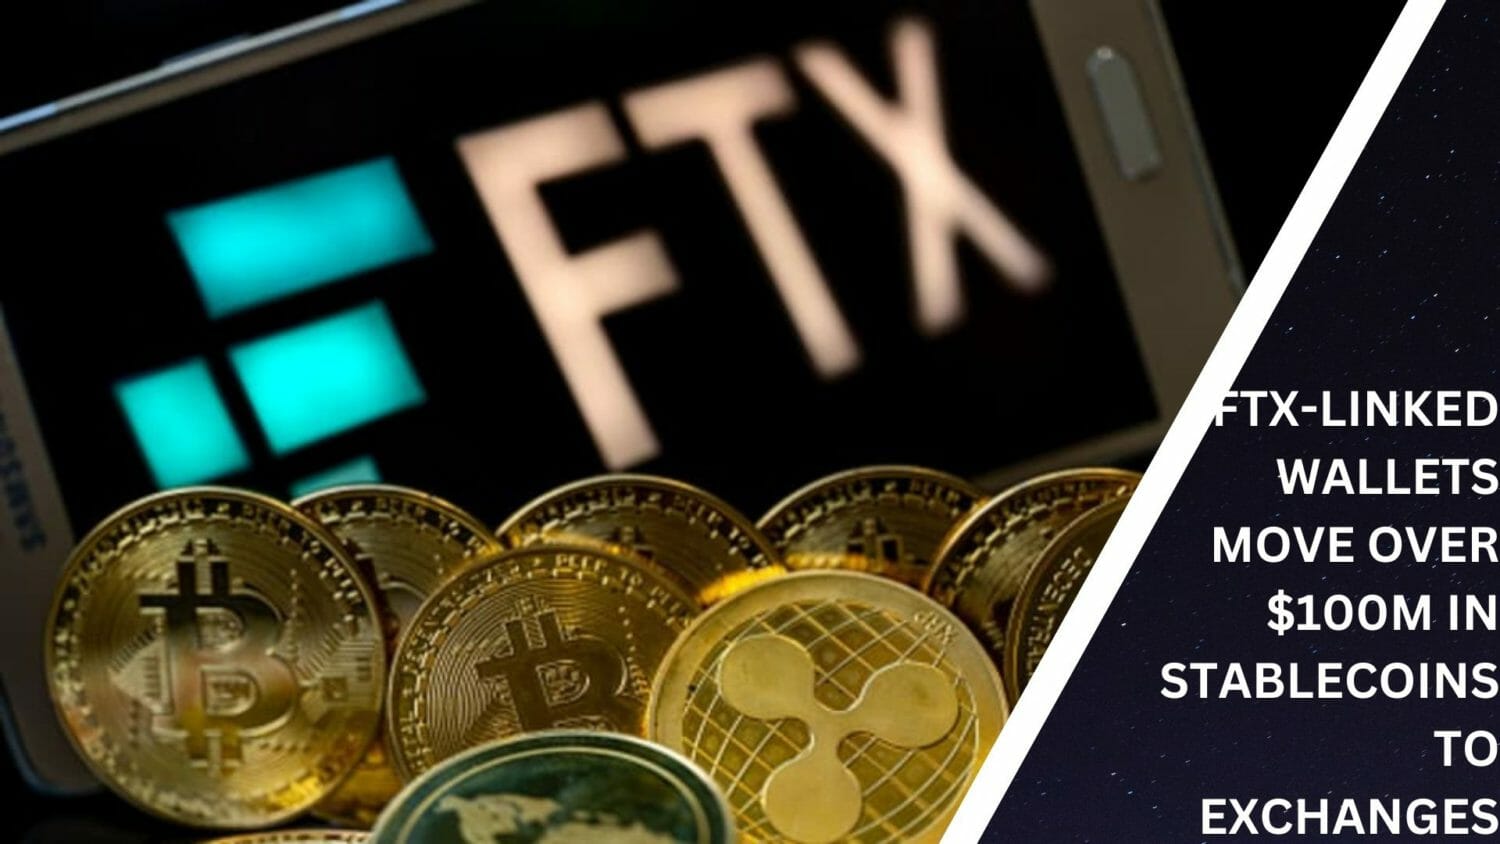 Ftx-Linked Wallets Move Over $100M In Stablecoins To Exchanges